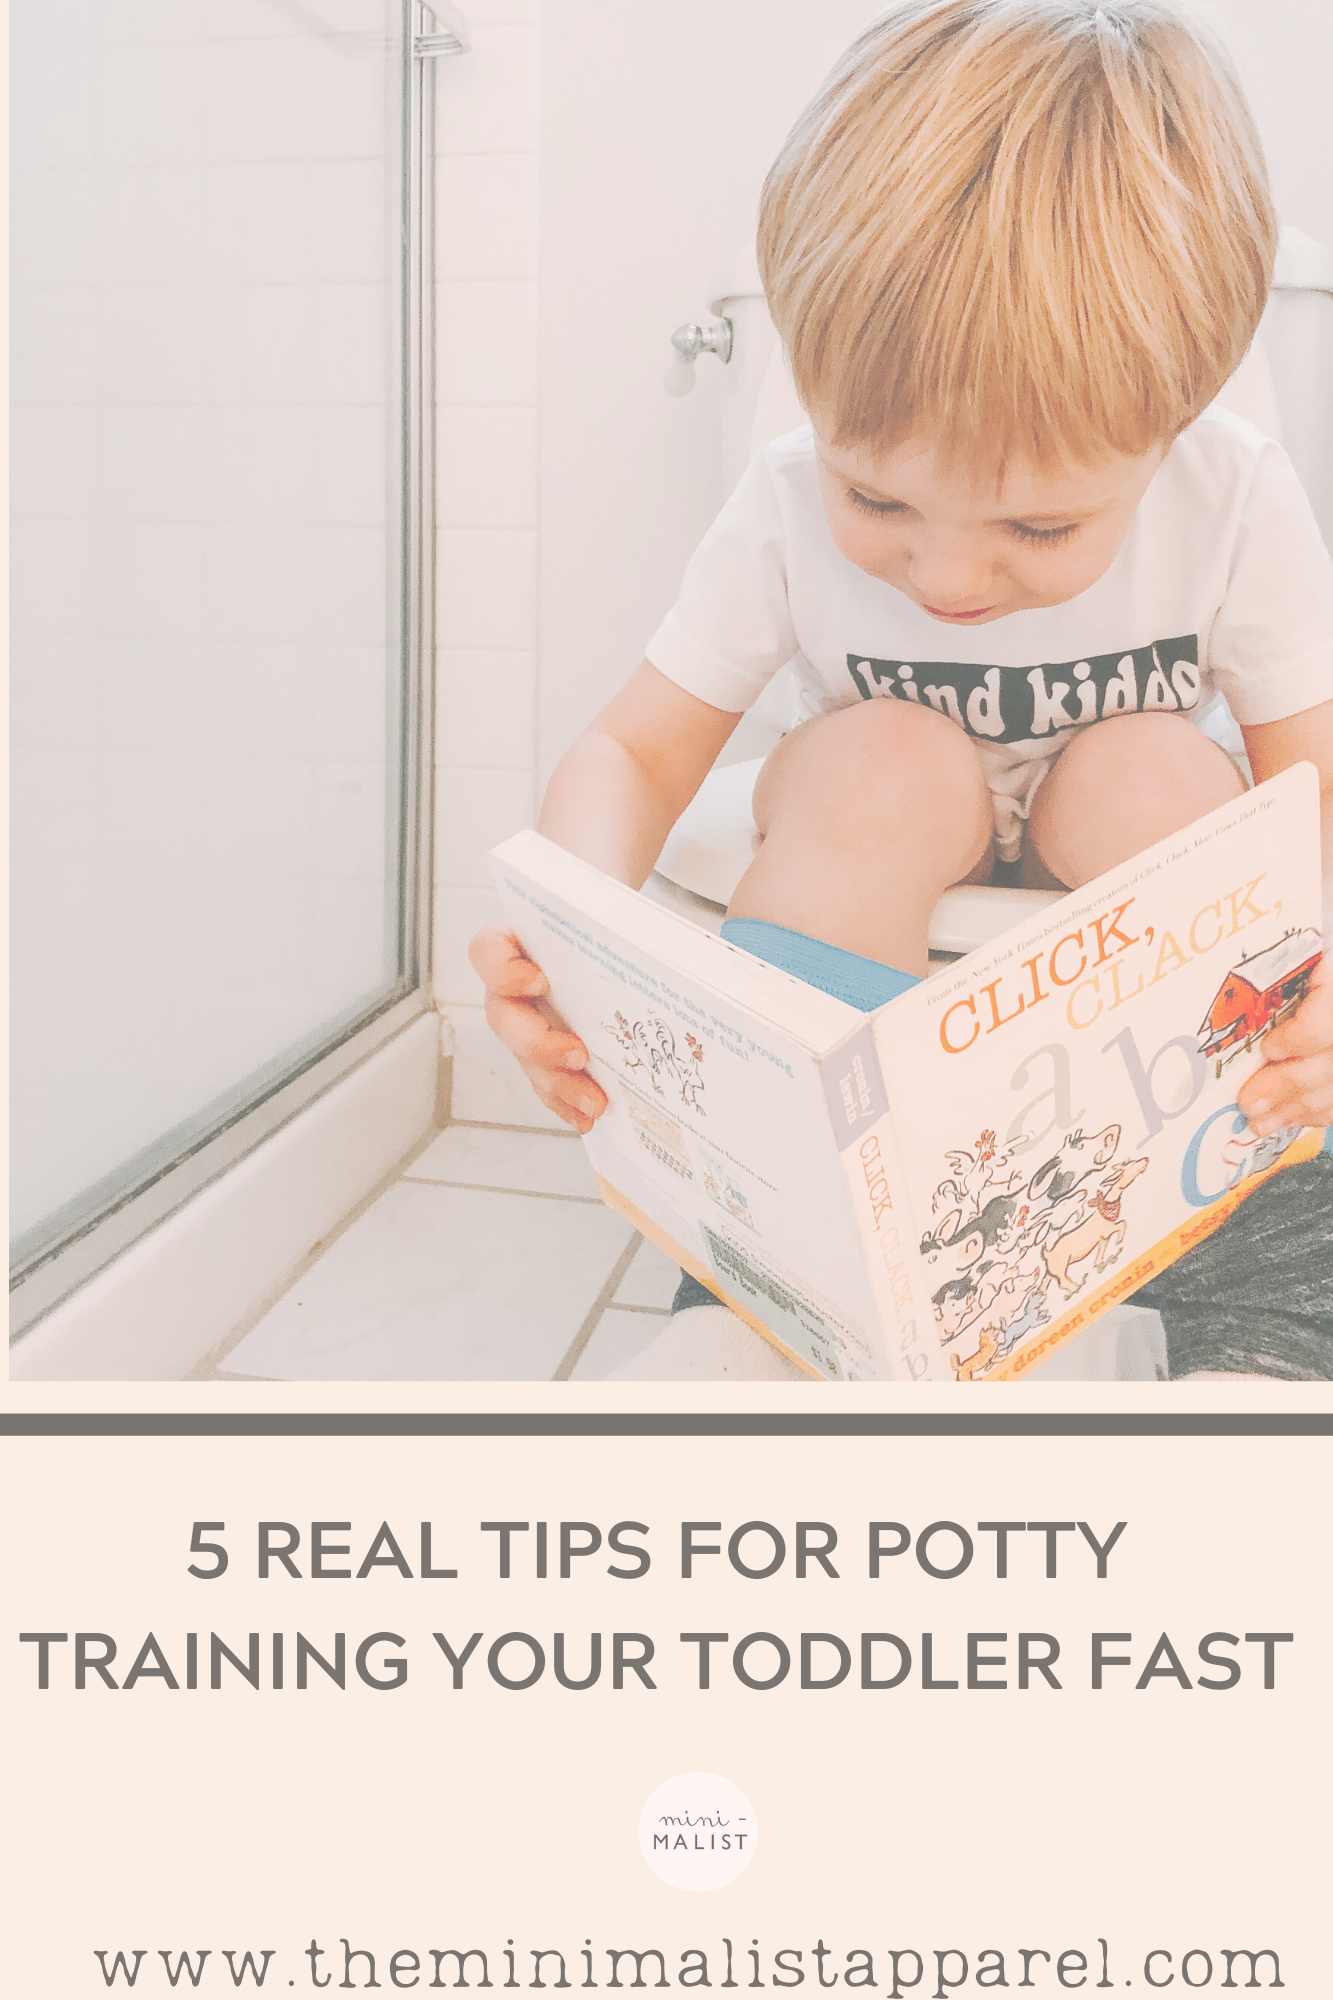 5 Real Tips For Potty Training A Toddler FAST!